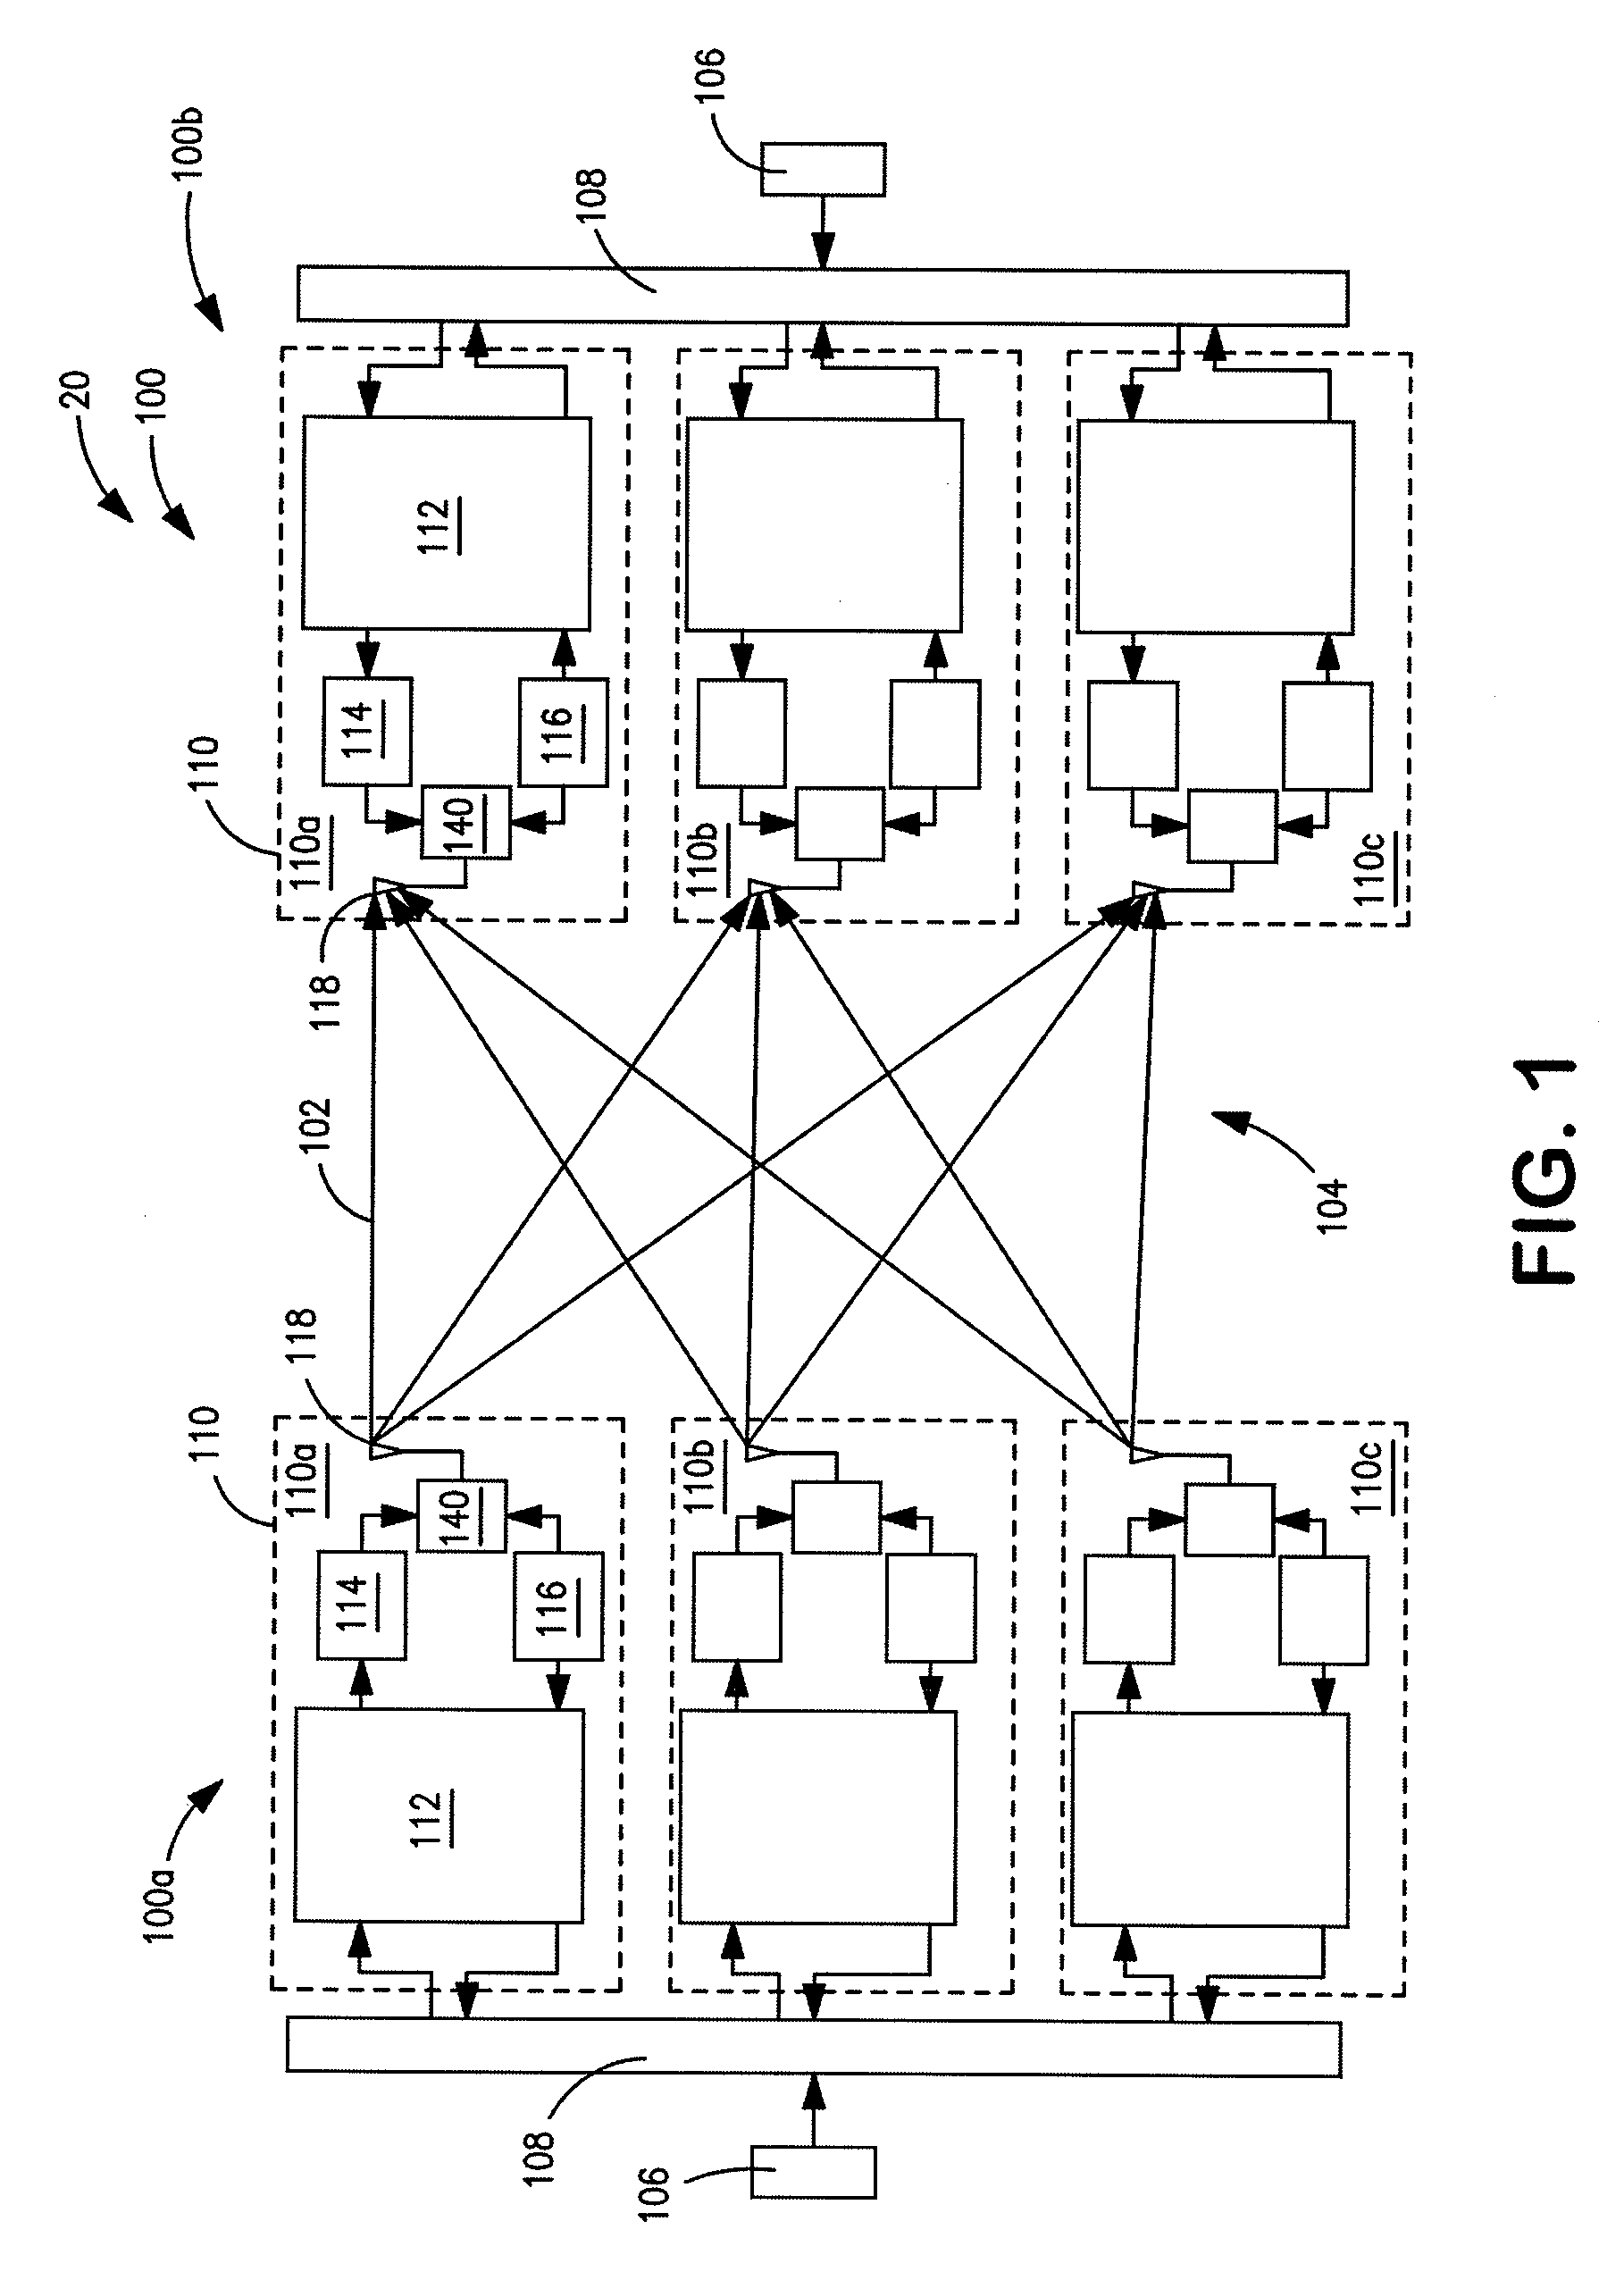 System and method for frequency offsetting of information communicated in MIMO based wireless networks